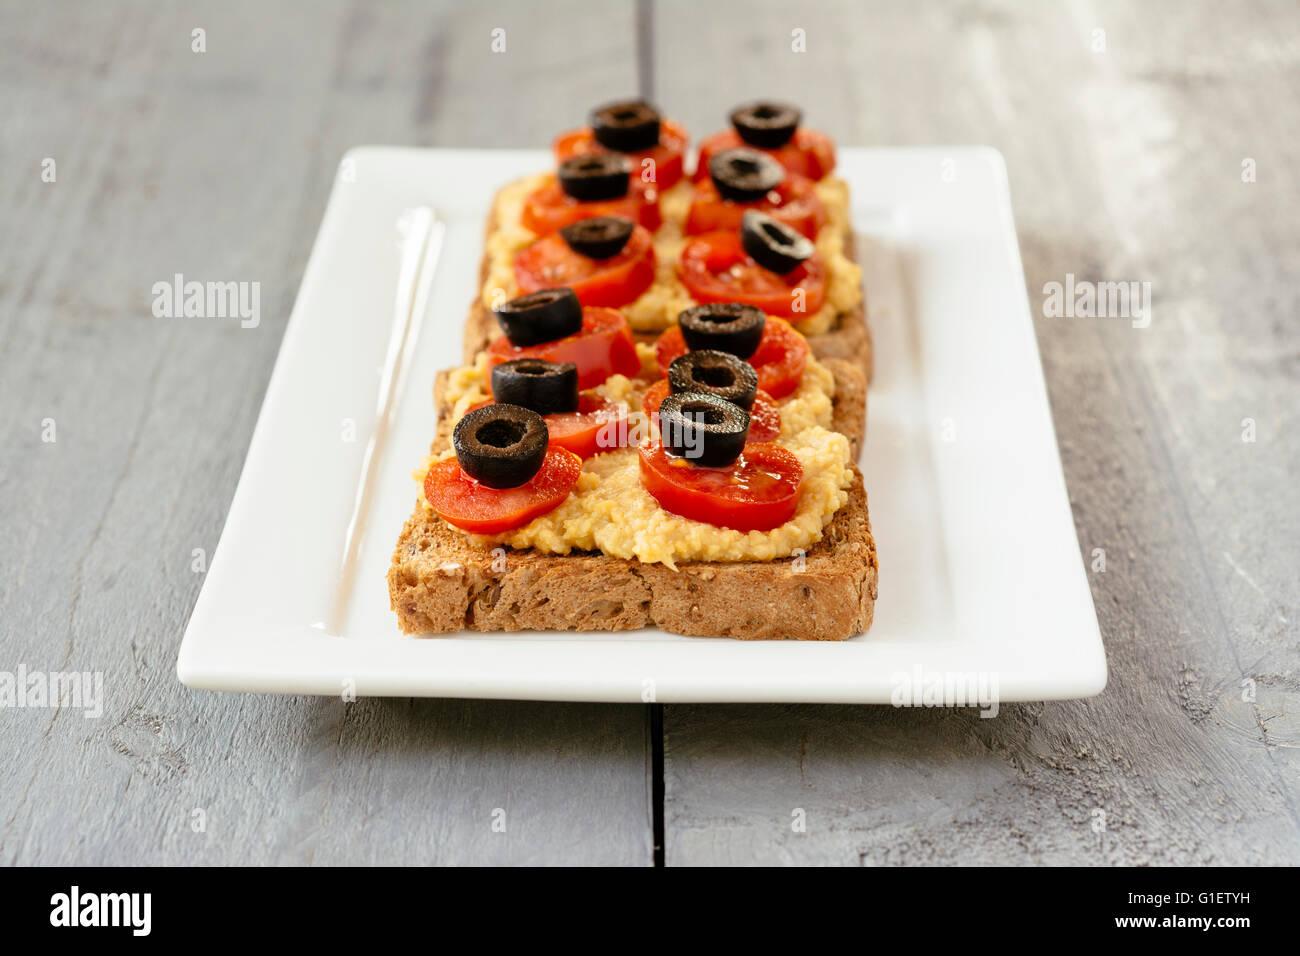 Hummus toasts with cherry tomatoes and black olives. Stock Photo